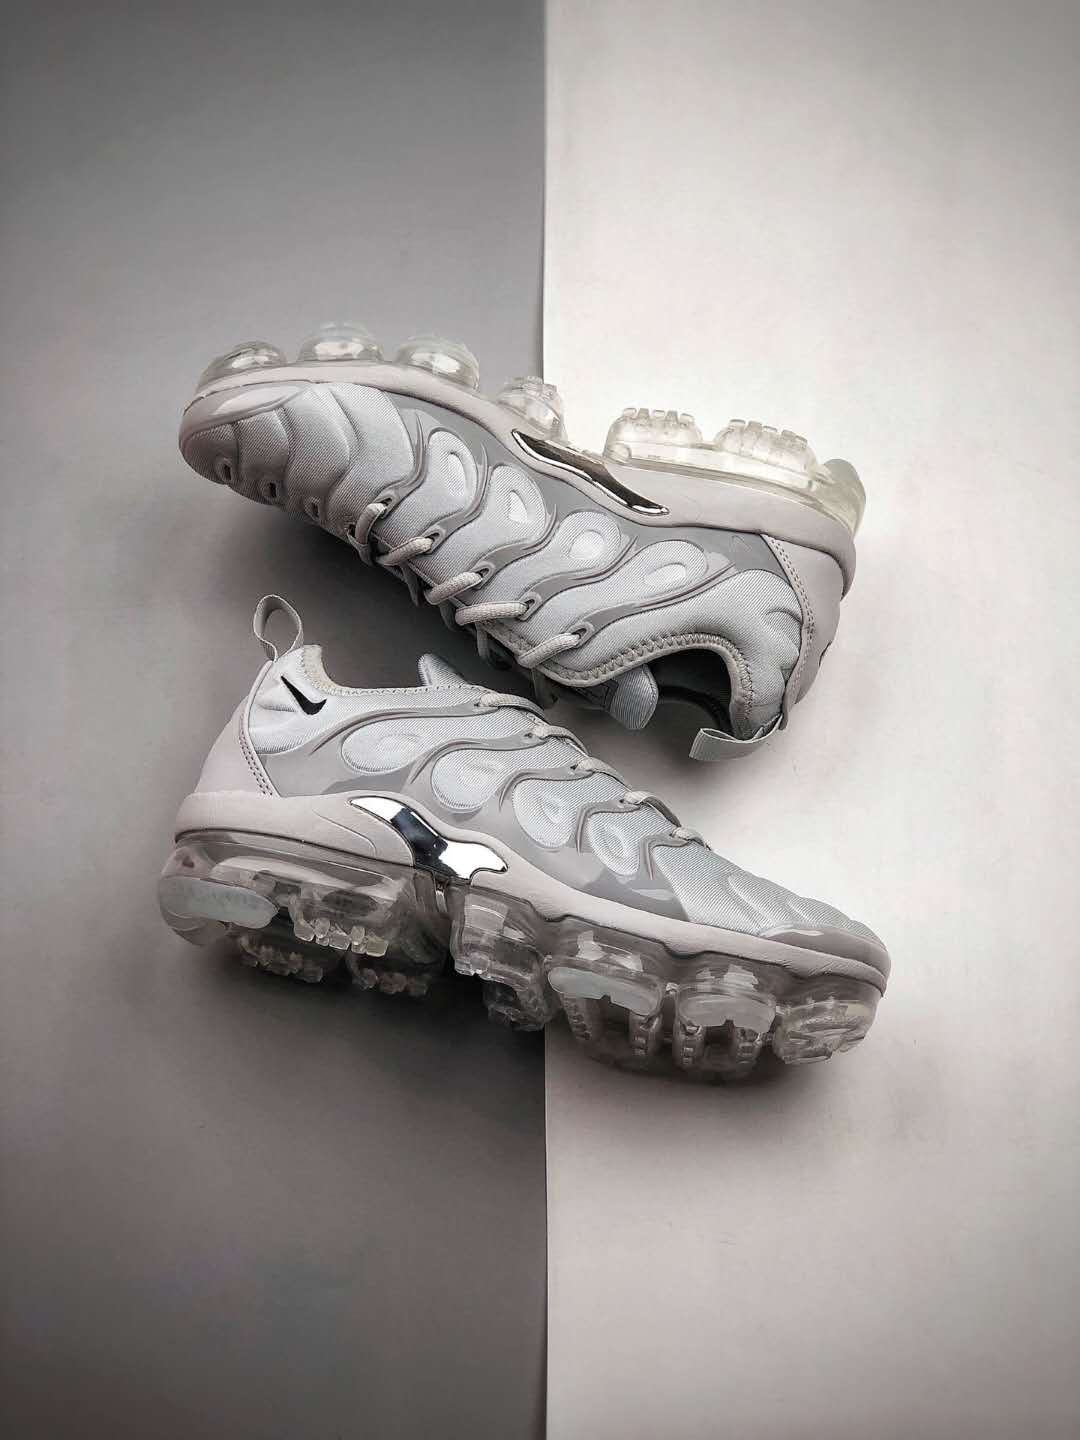 Nike Air VaporMax Plus 'Wolf Grey' 924453-005 - Shop the Hottest Sneaker in Chic Wolf Grey Shade!